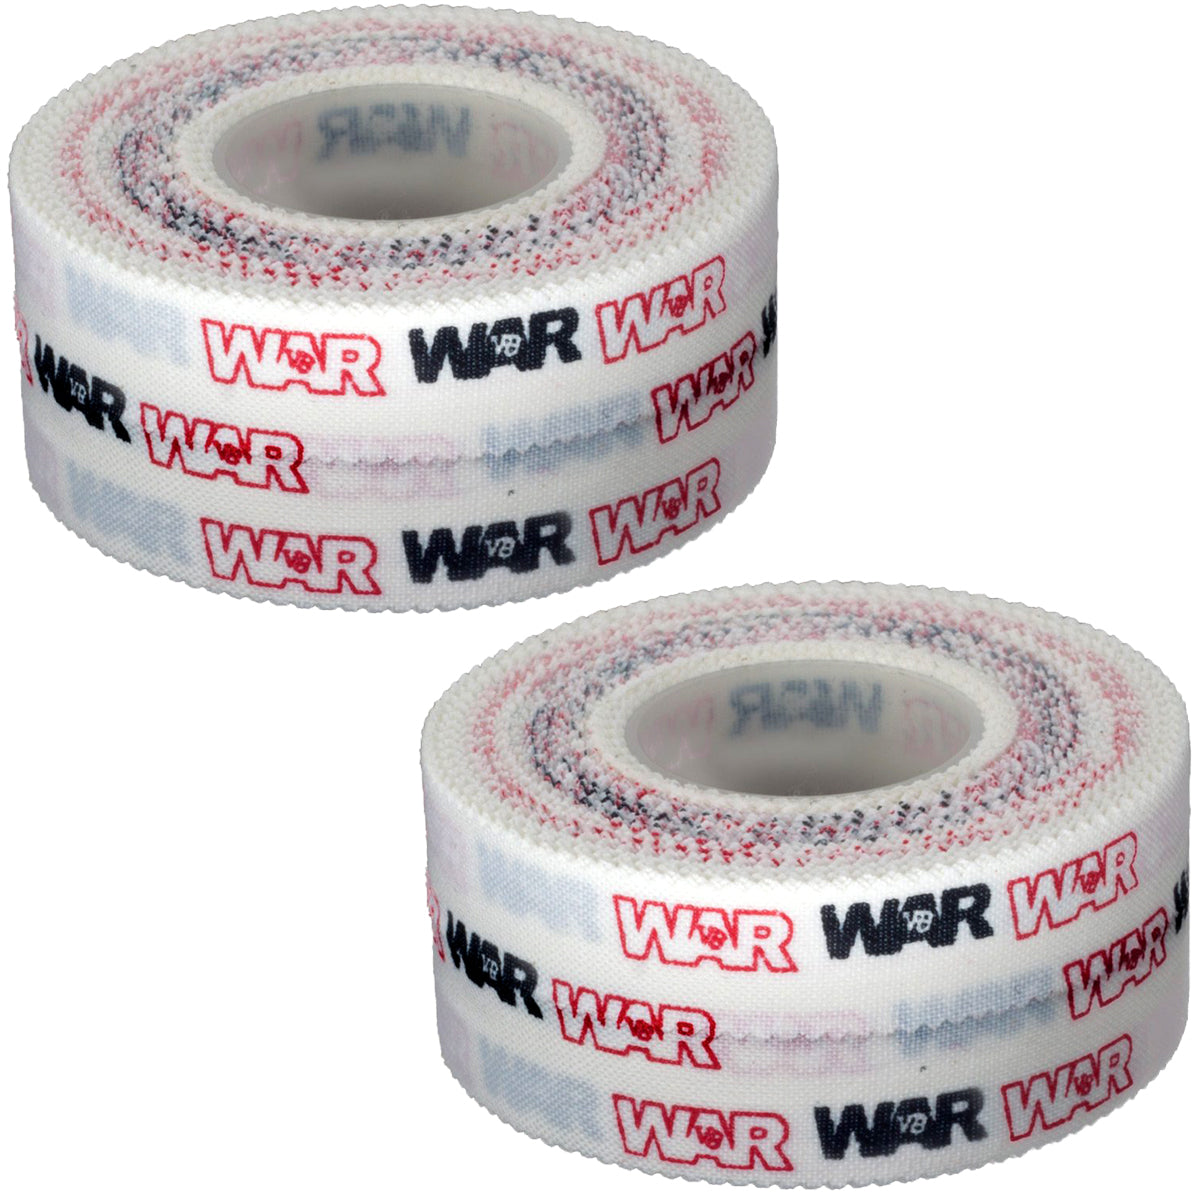 WAR Tape 0.5" EZ Rip Athletic Tape for Boxing, MMA, Muay Thai - 2 Pack WAR Tape